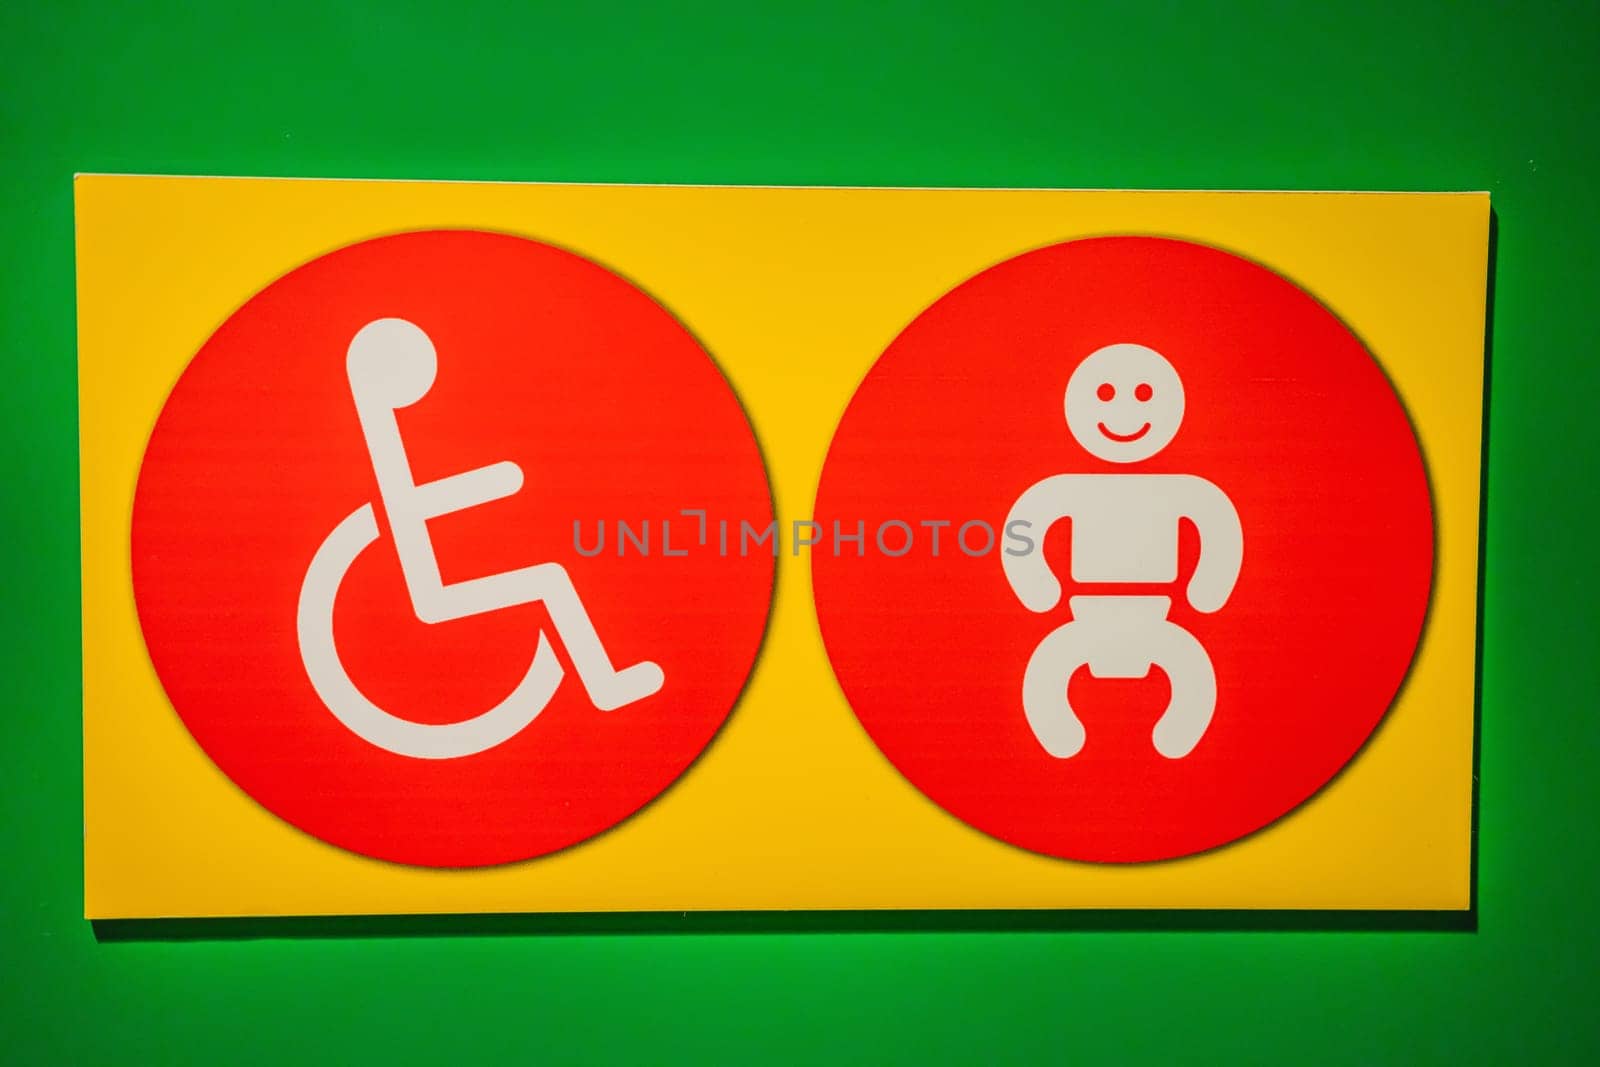 Signs for small children and disabled people.